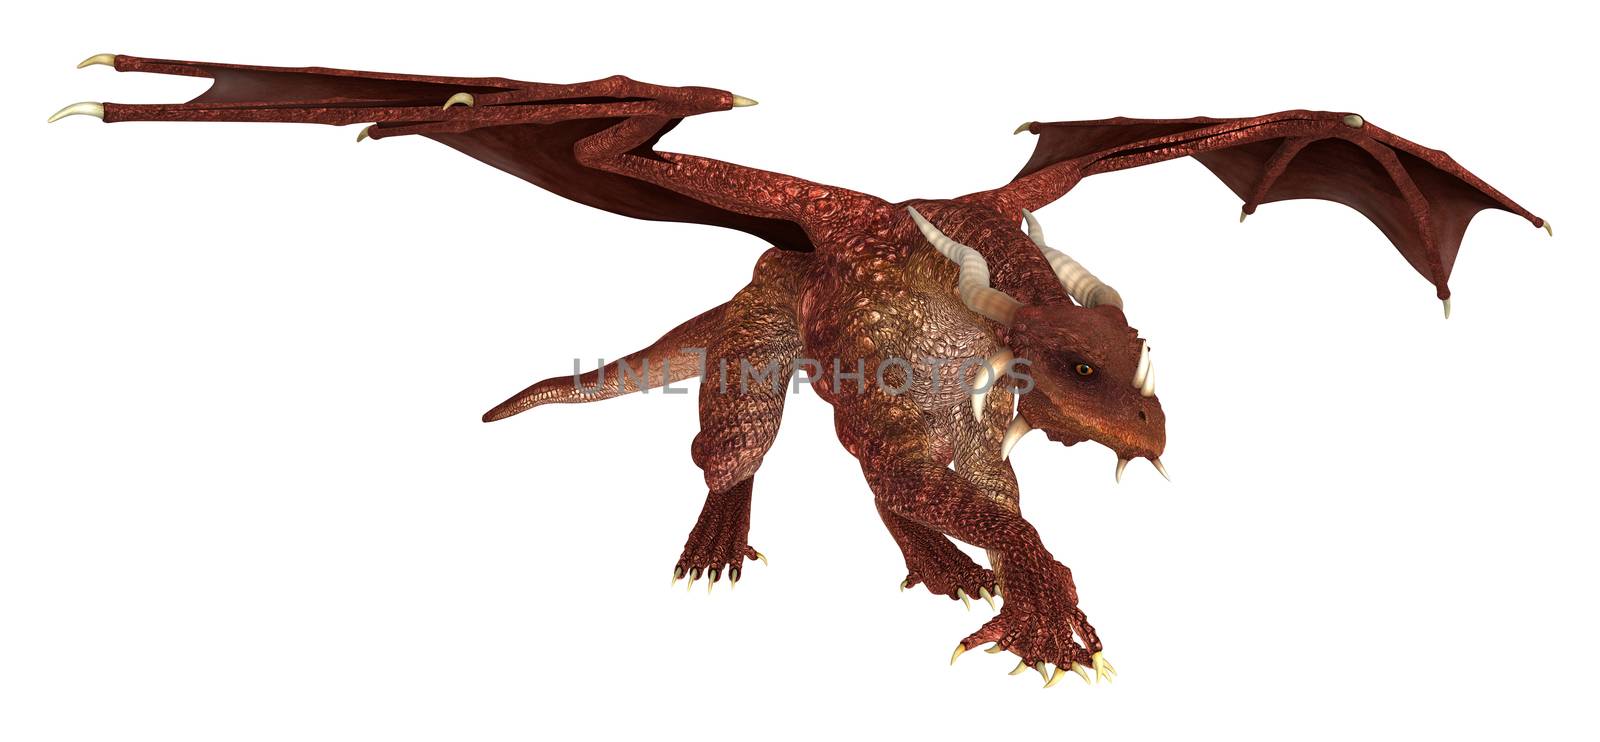 3D digital render of a red fairytale dragon isolated on white background